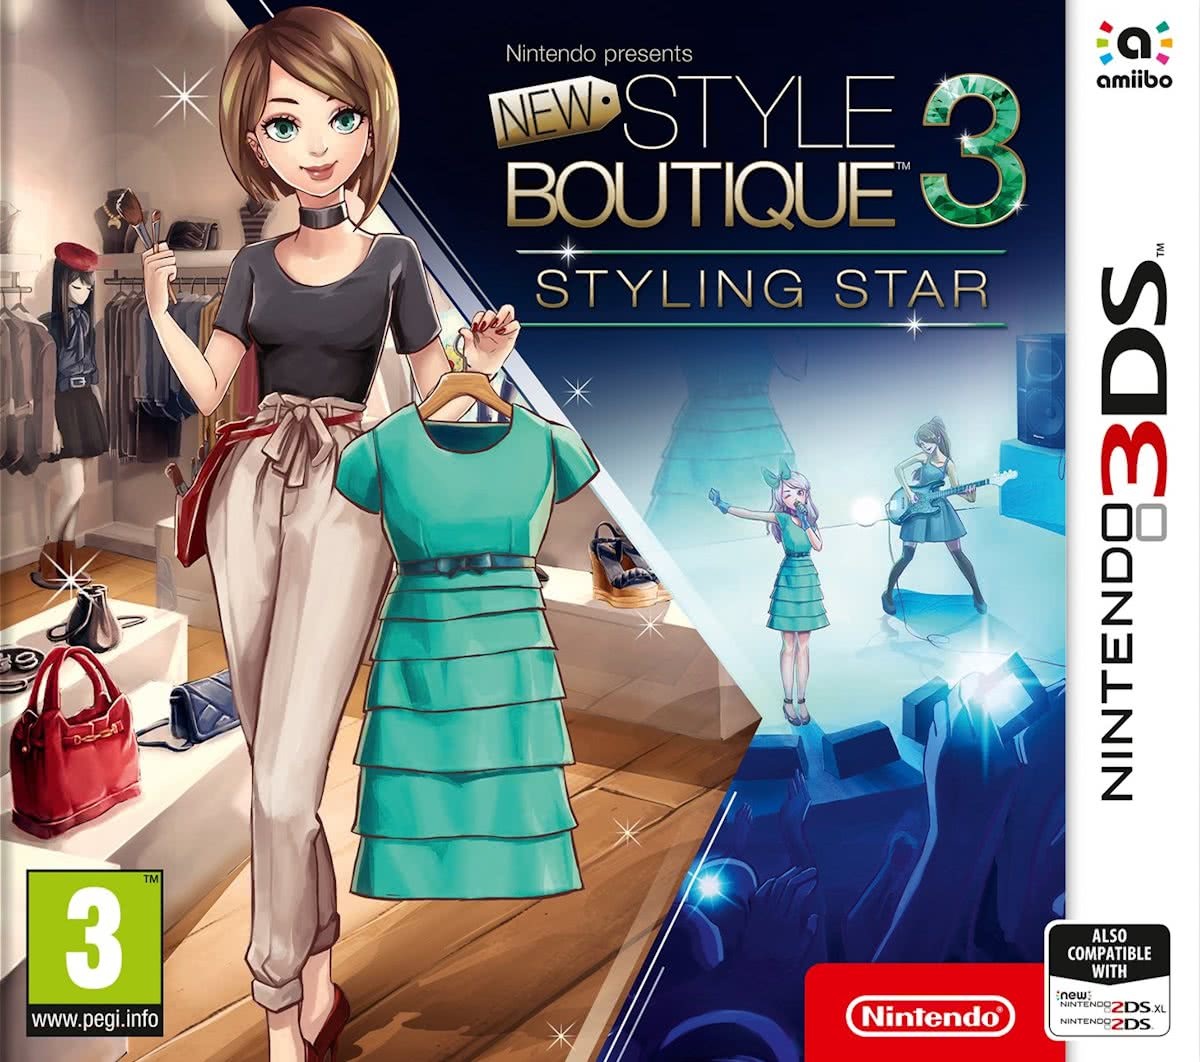 Nintendo New Style Boutique 3 Styling Star Nintendo 3DS